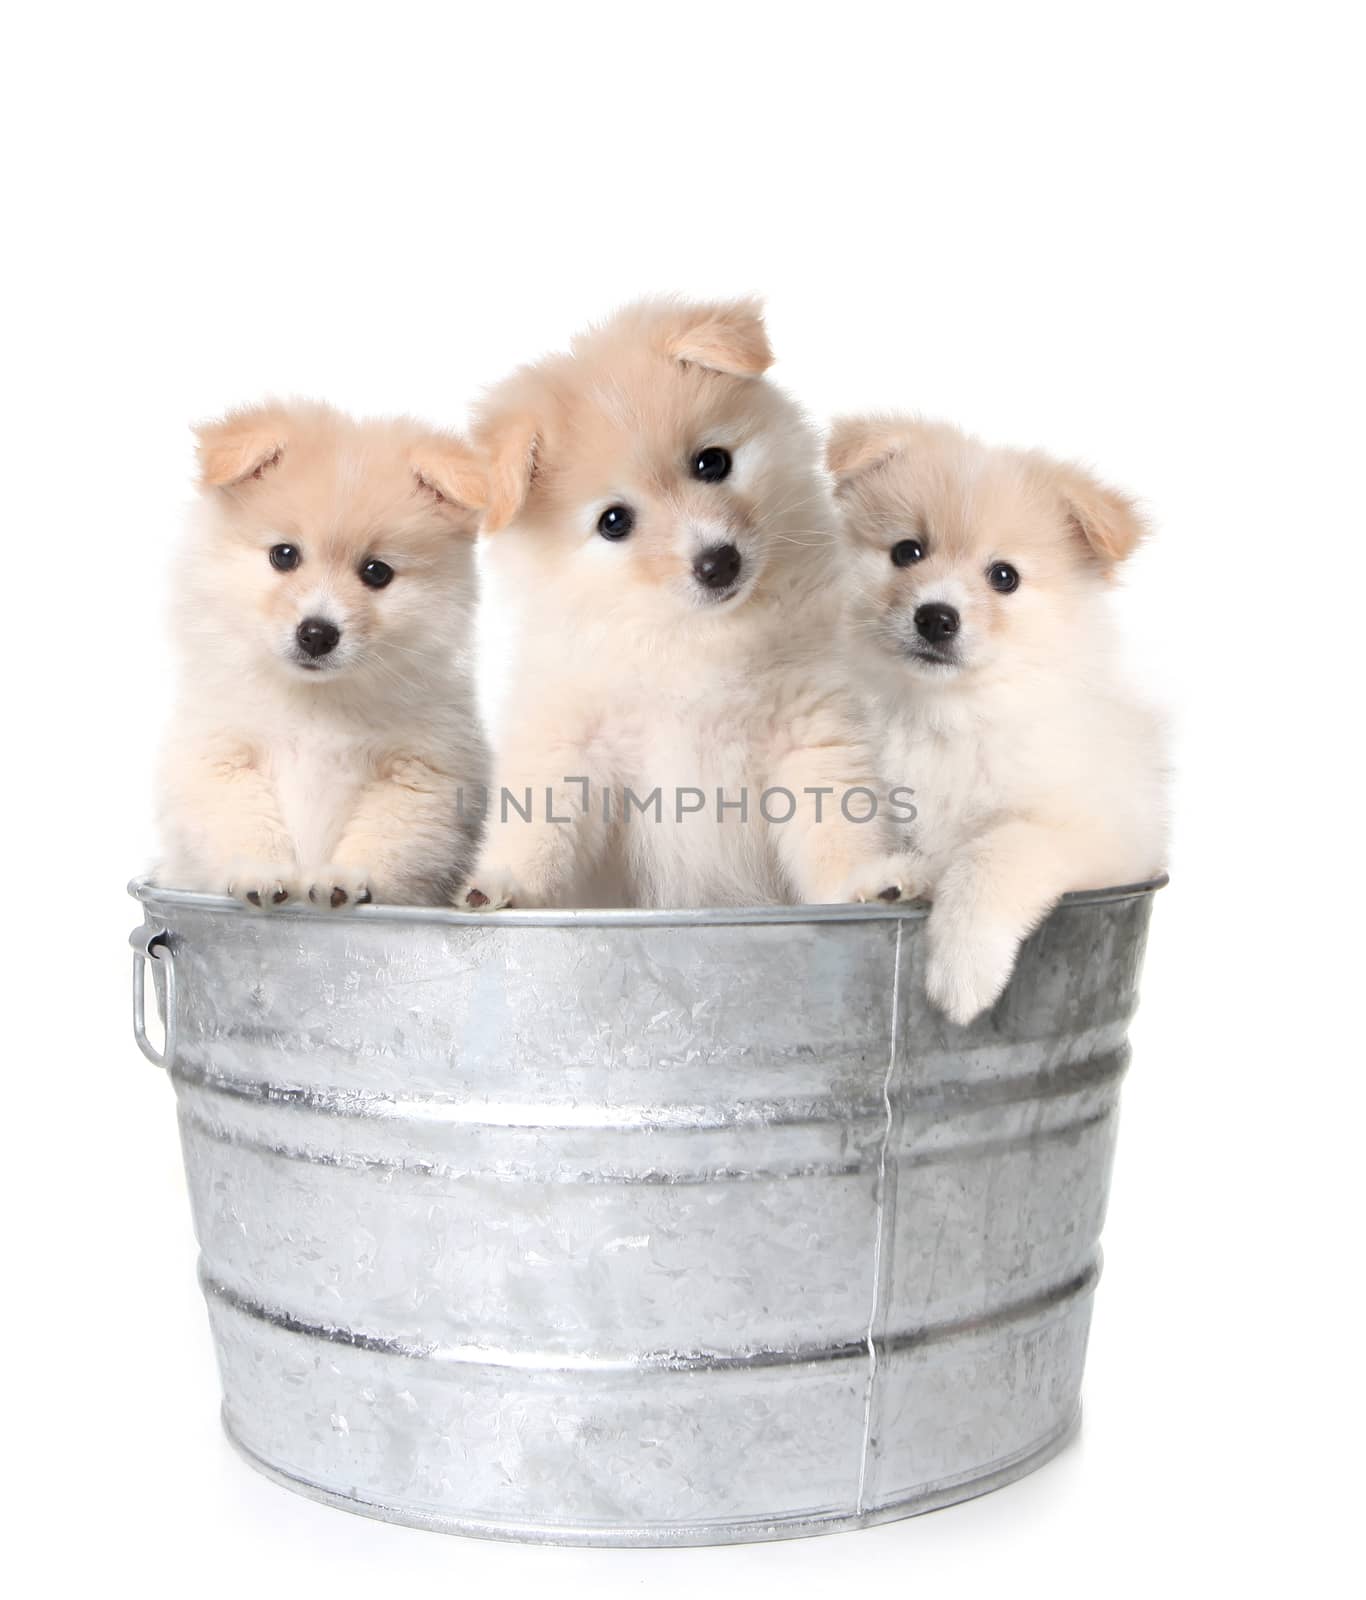 Trio of Adorable Puppies in a Washtub